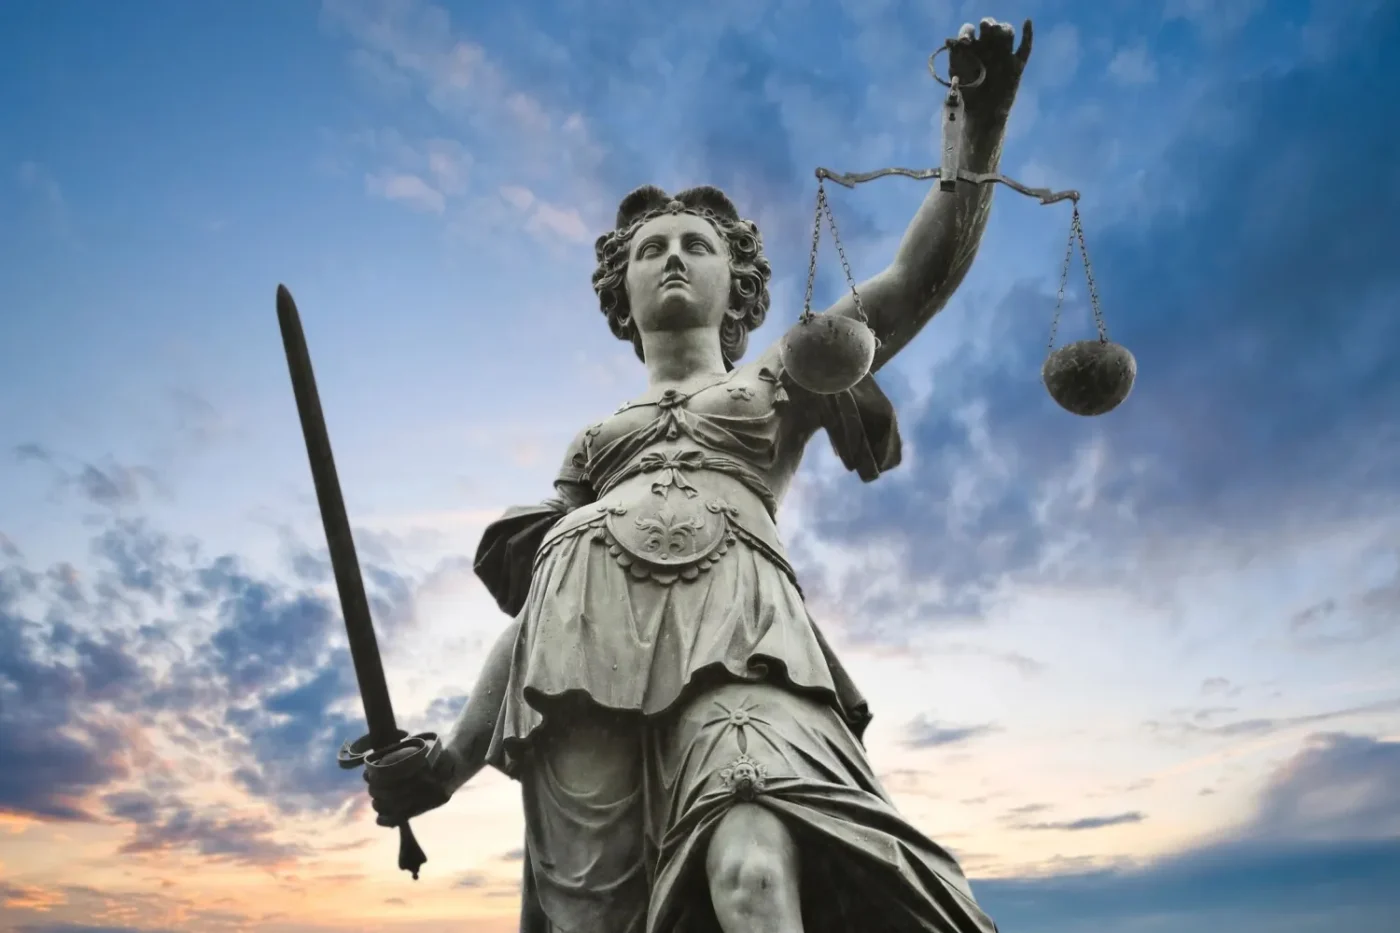 A statue of lady justice holding the scales and sword.